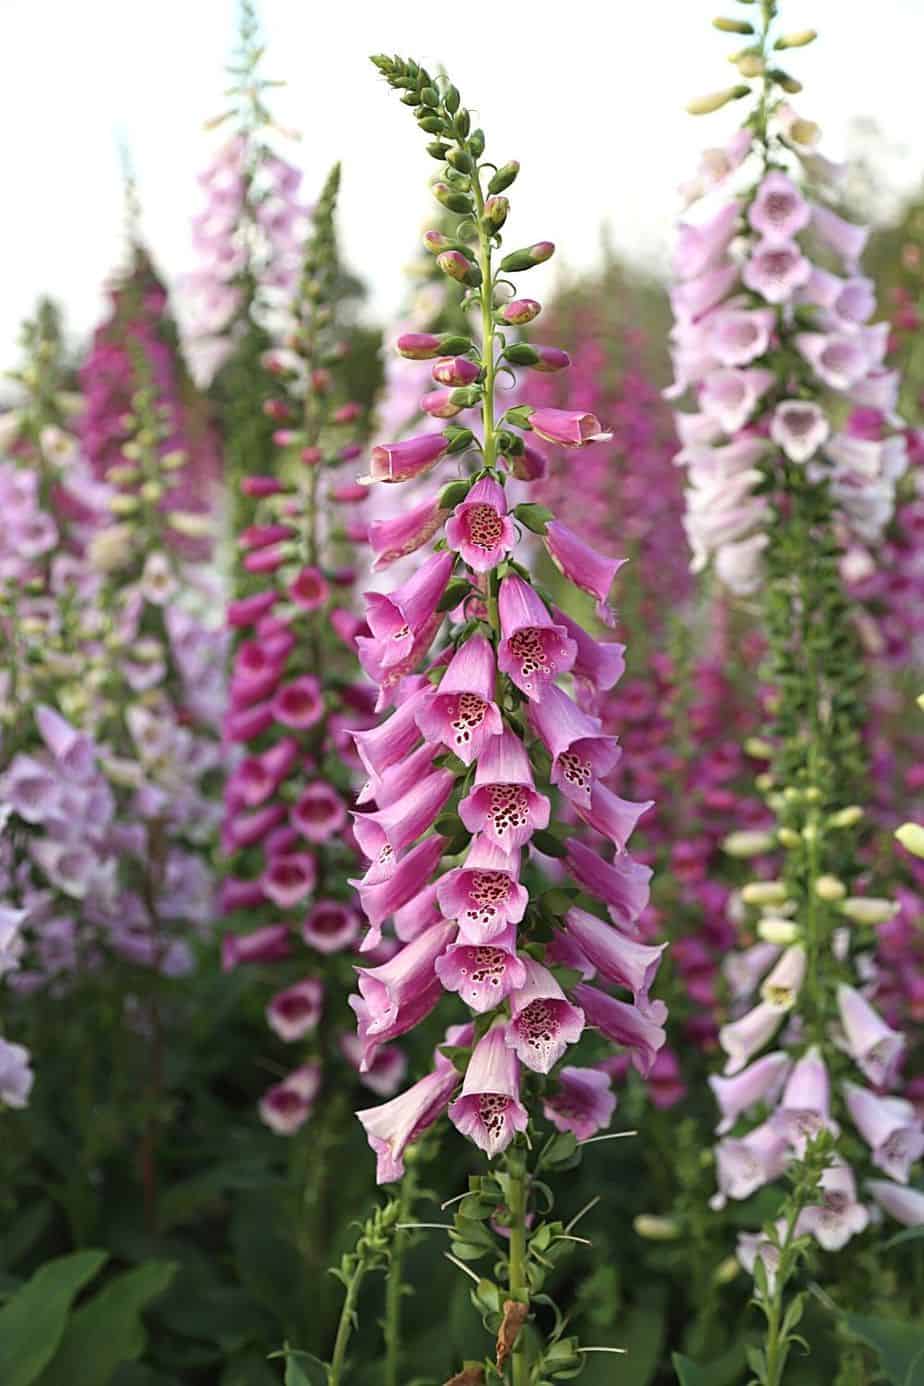 Foxglove grows bell-shaped flowers that are great addition to your north-facing balcony